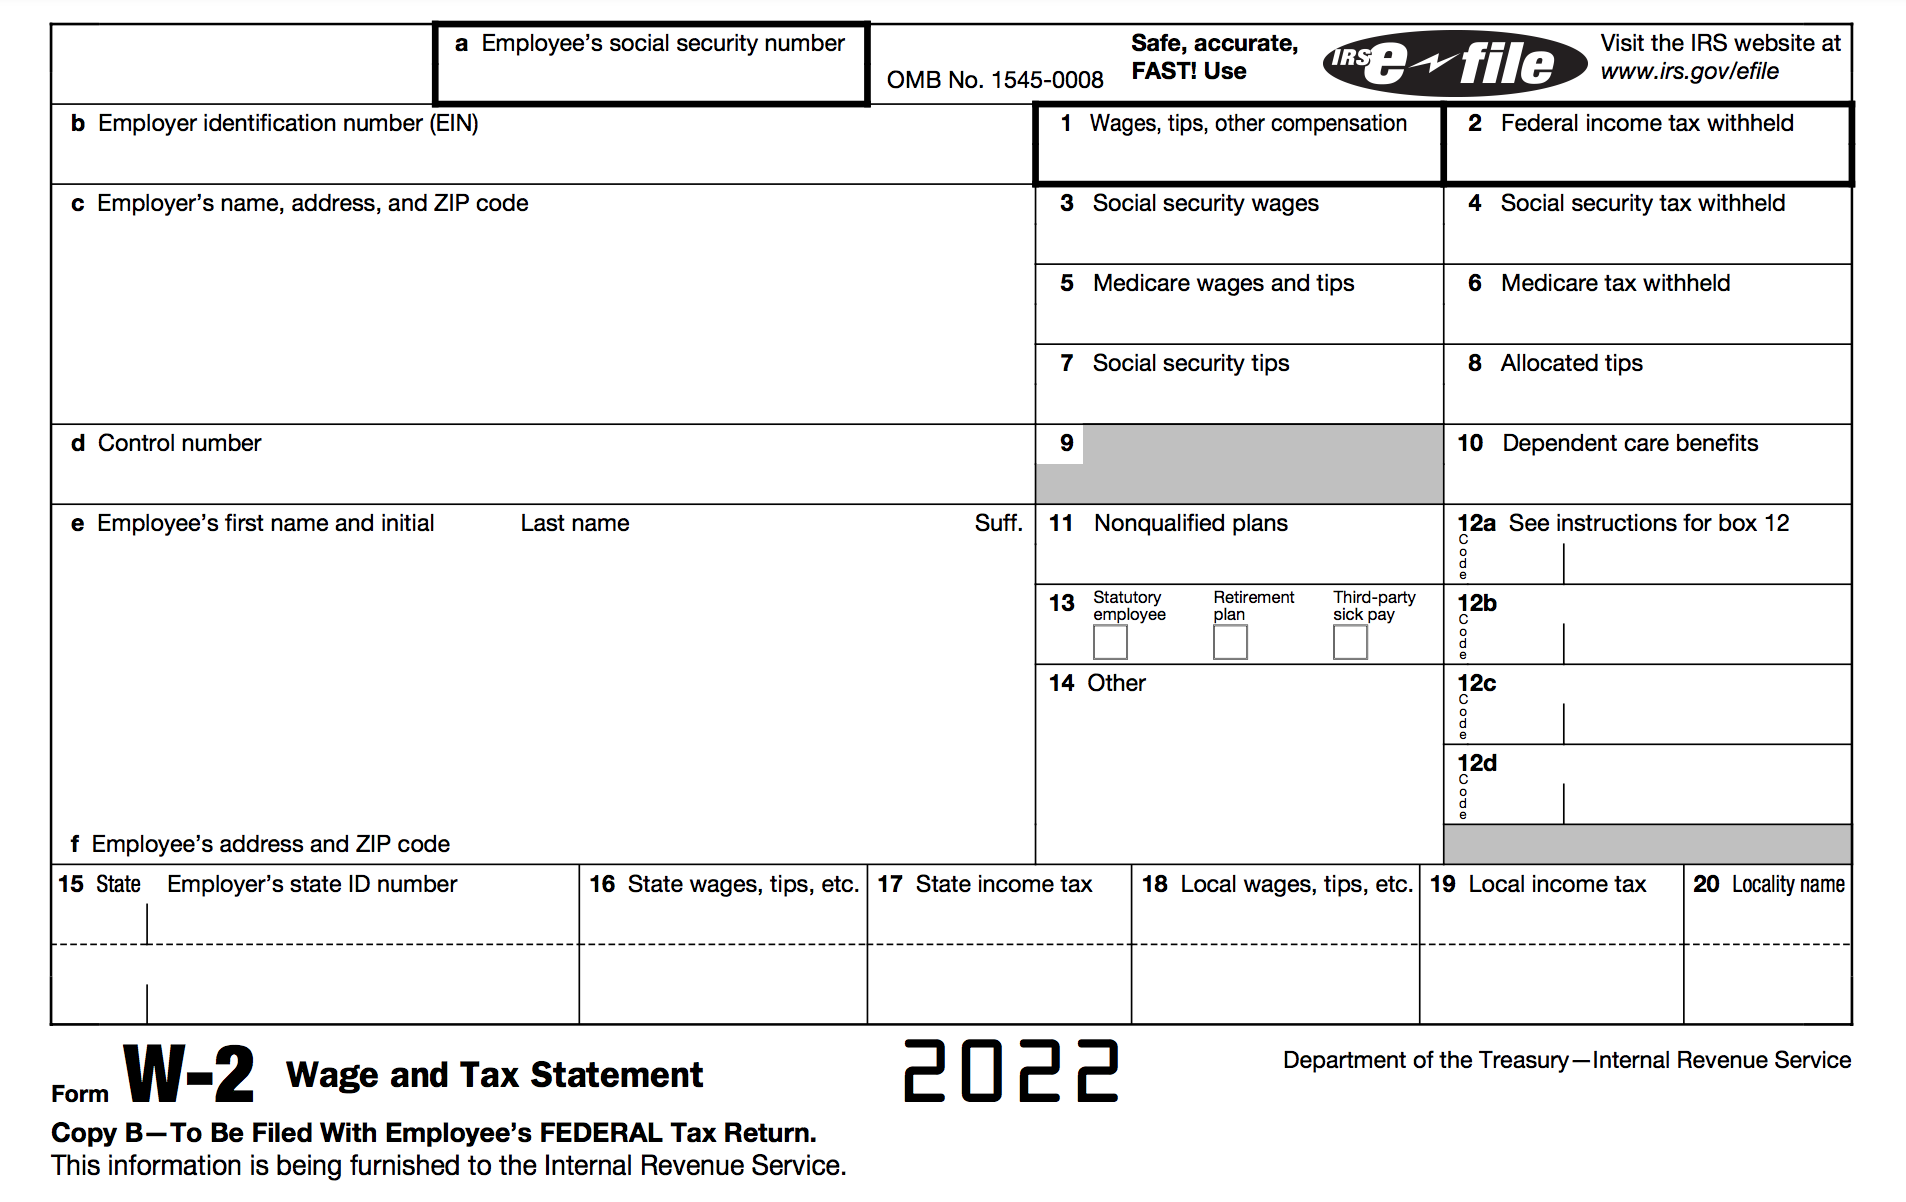 How To Fill Out A W-2 Tax Form | Smartasset within W2 Form How To Fill Out